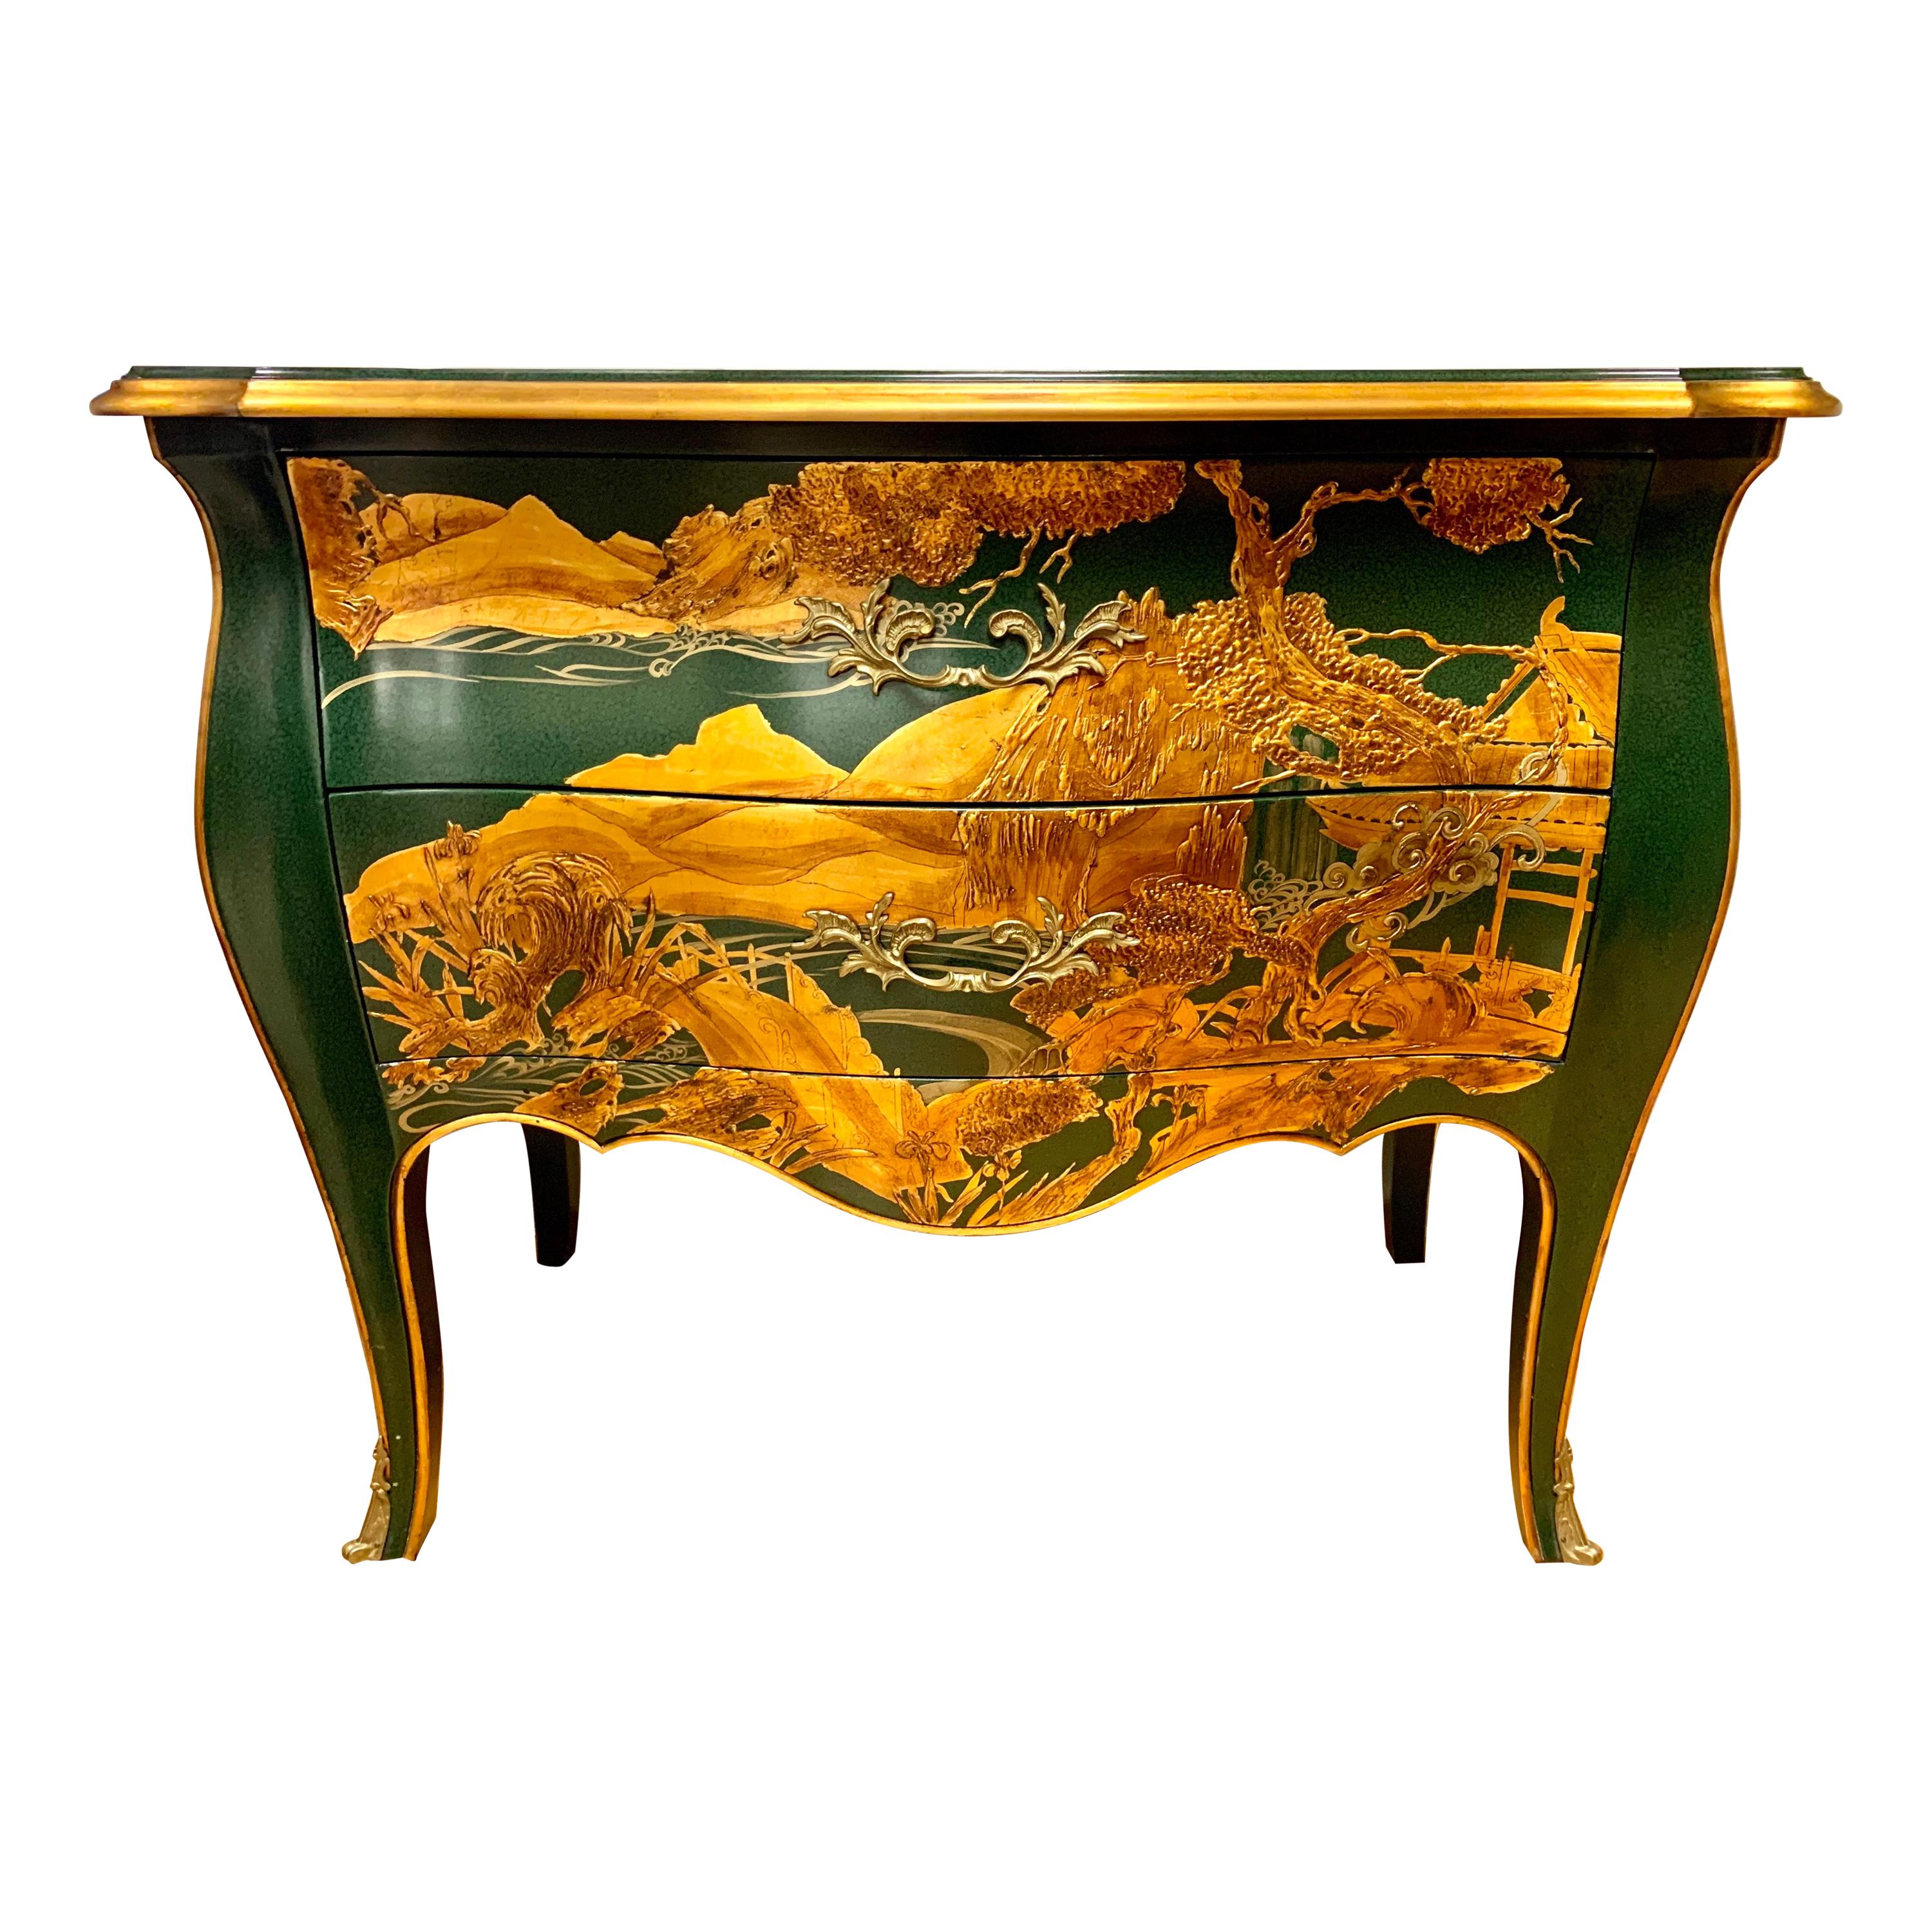 Signed Chinoiserie Green Lacquer and Gold Bombe Chest by John Widdicomb Dresser